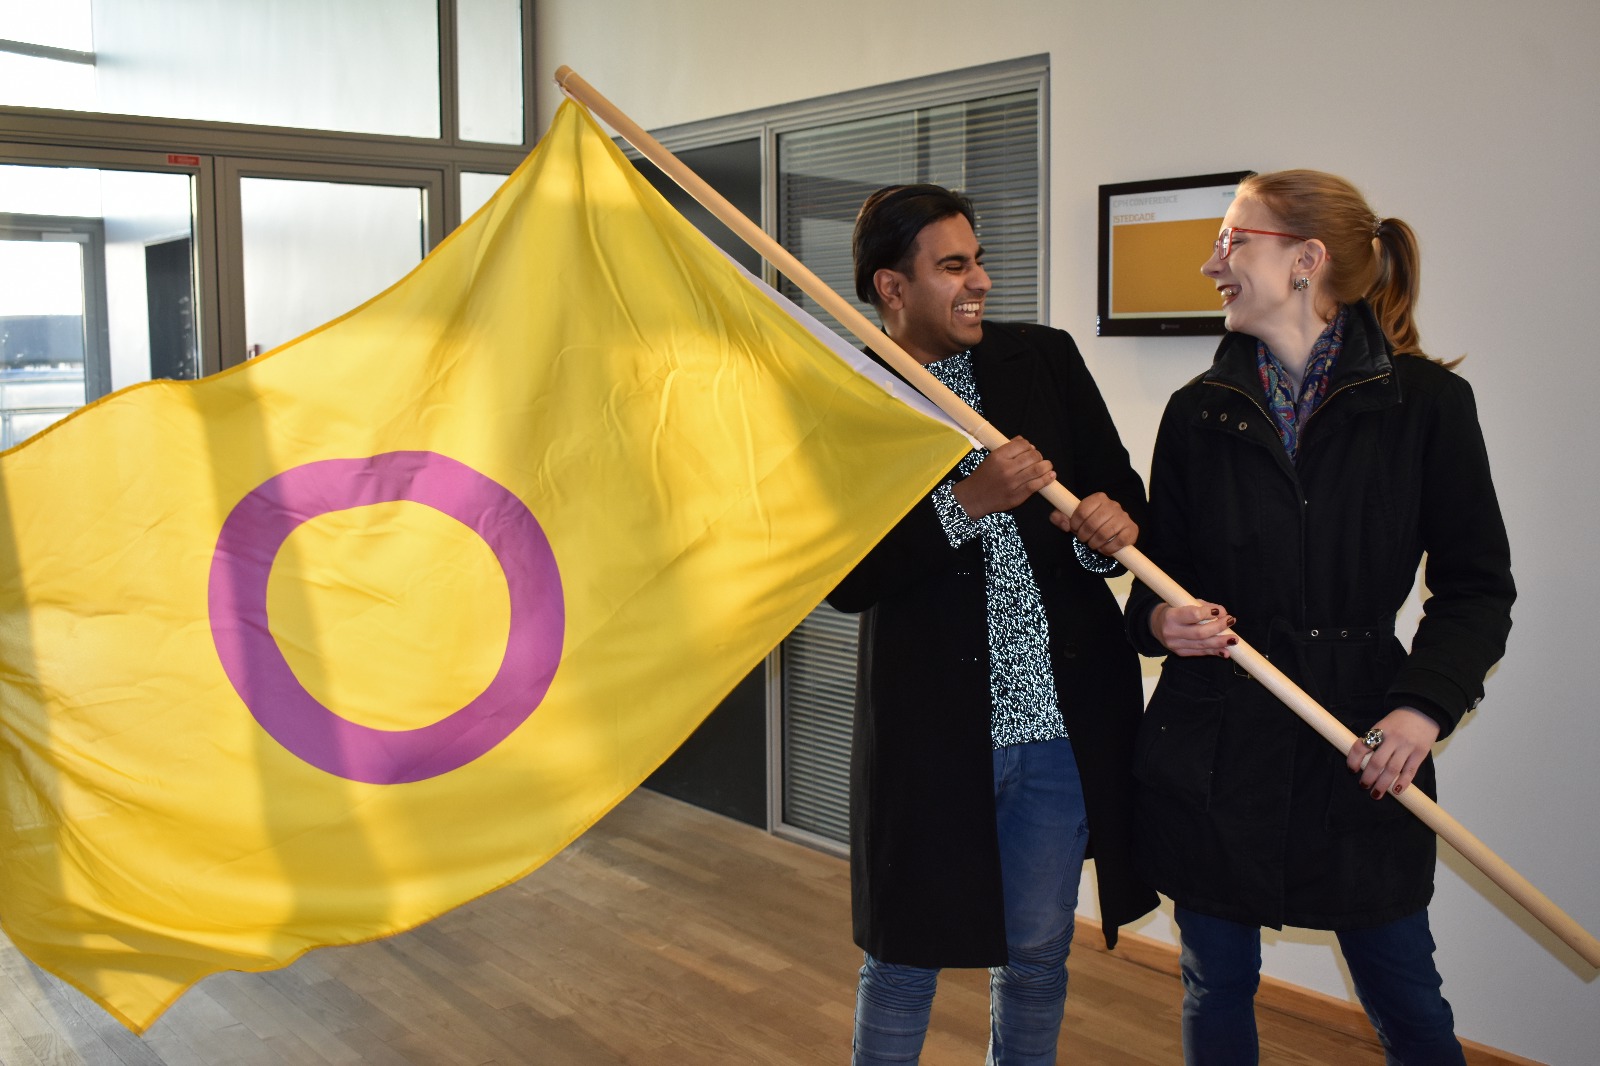 Anick and fellow intersex activist and interACT Youth member Irene waving an intersex flag at the Oii Europe 2018 Community Event in Copenhagen.